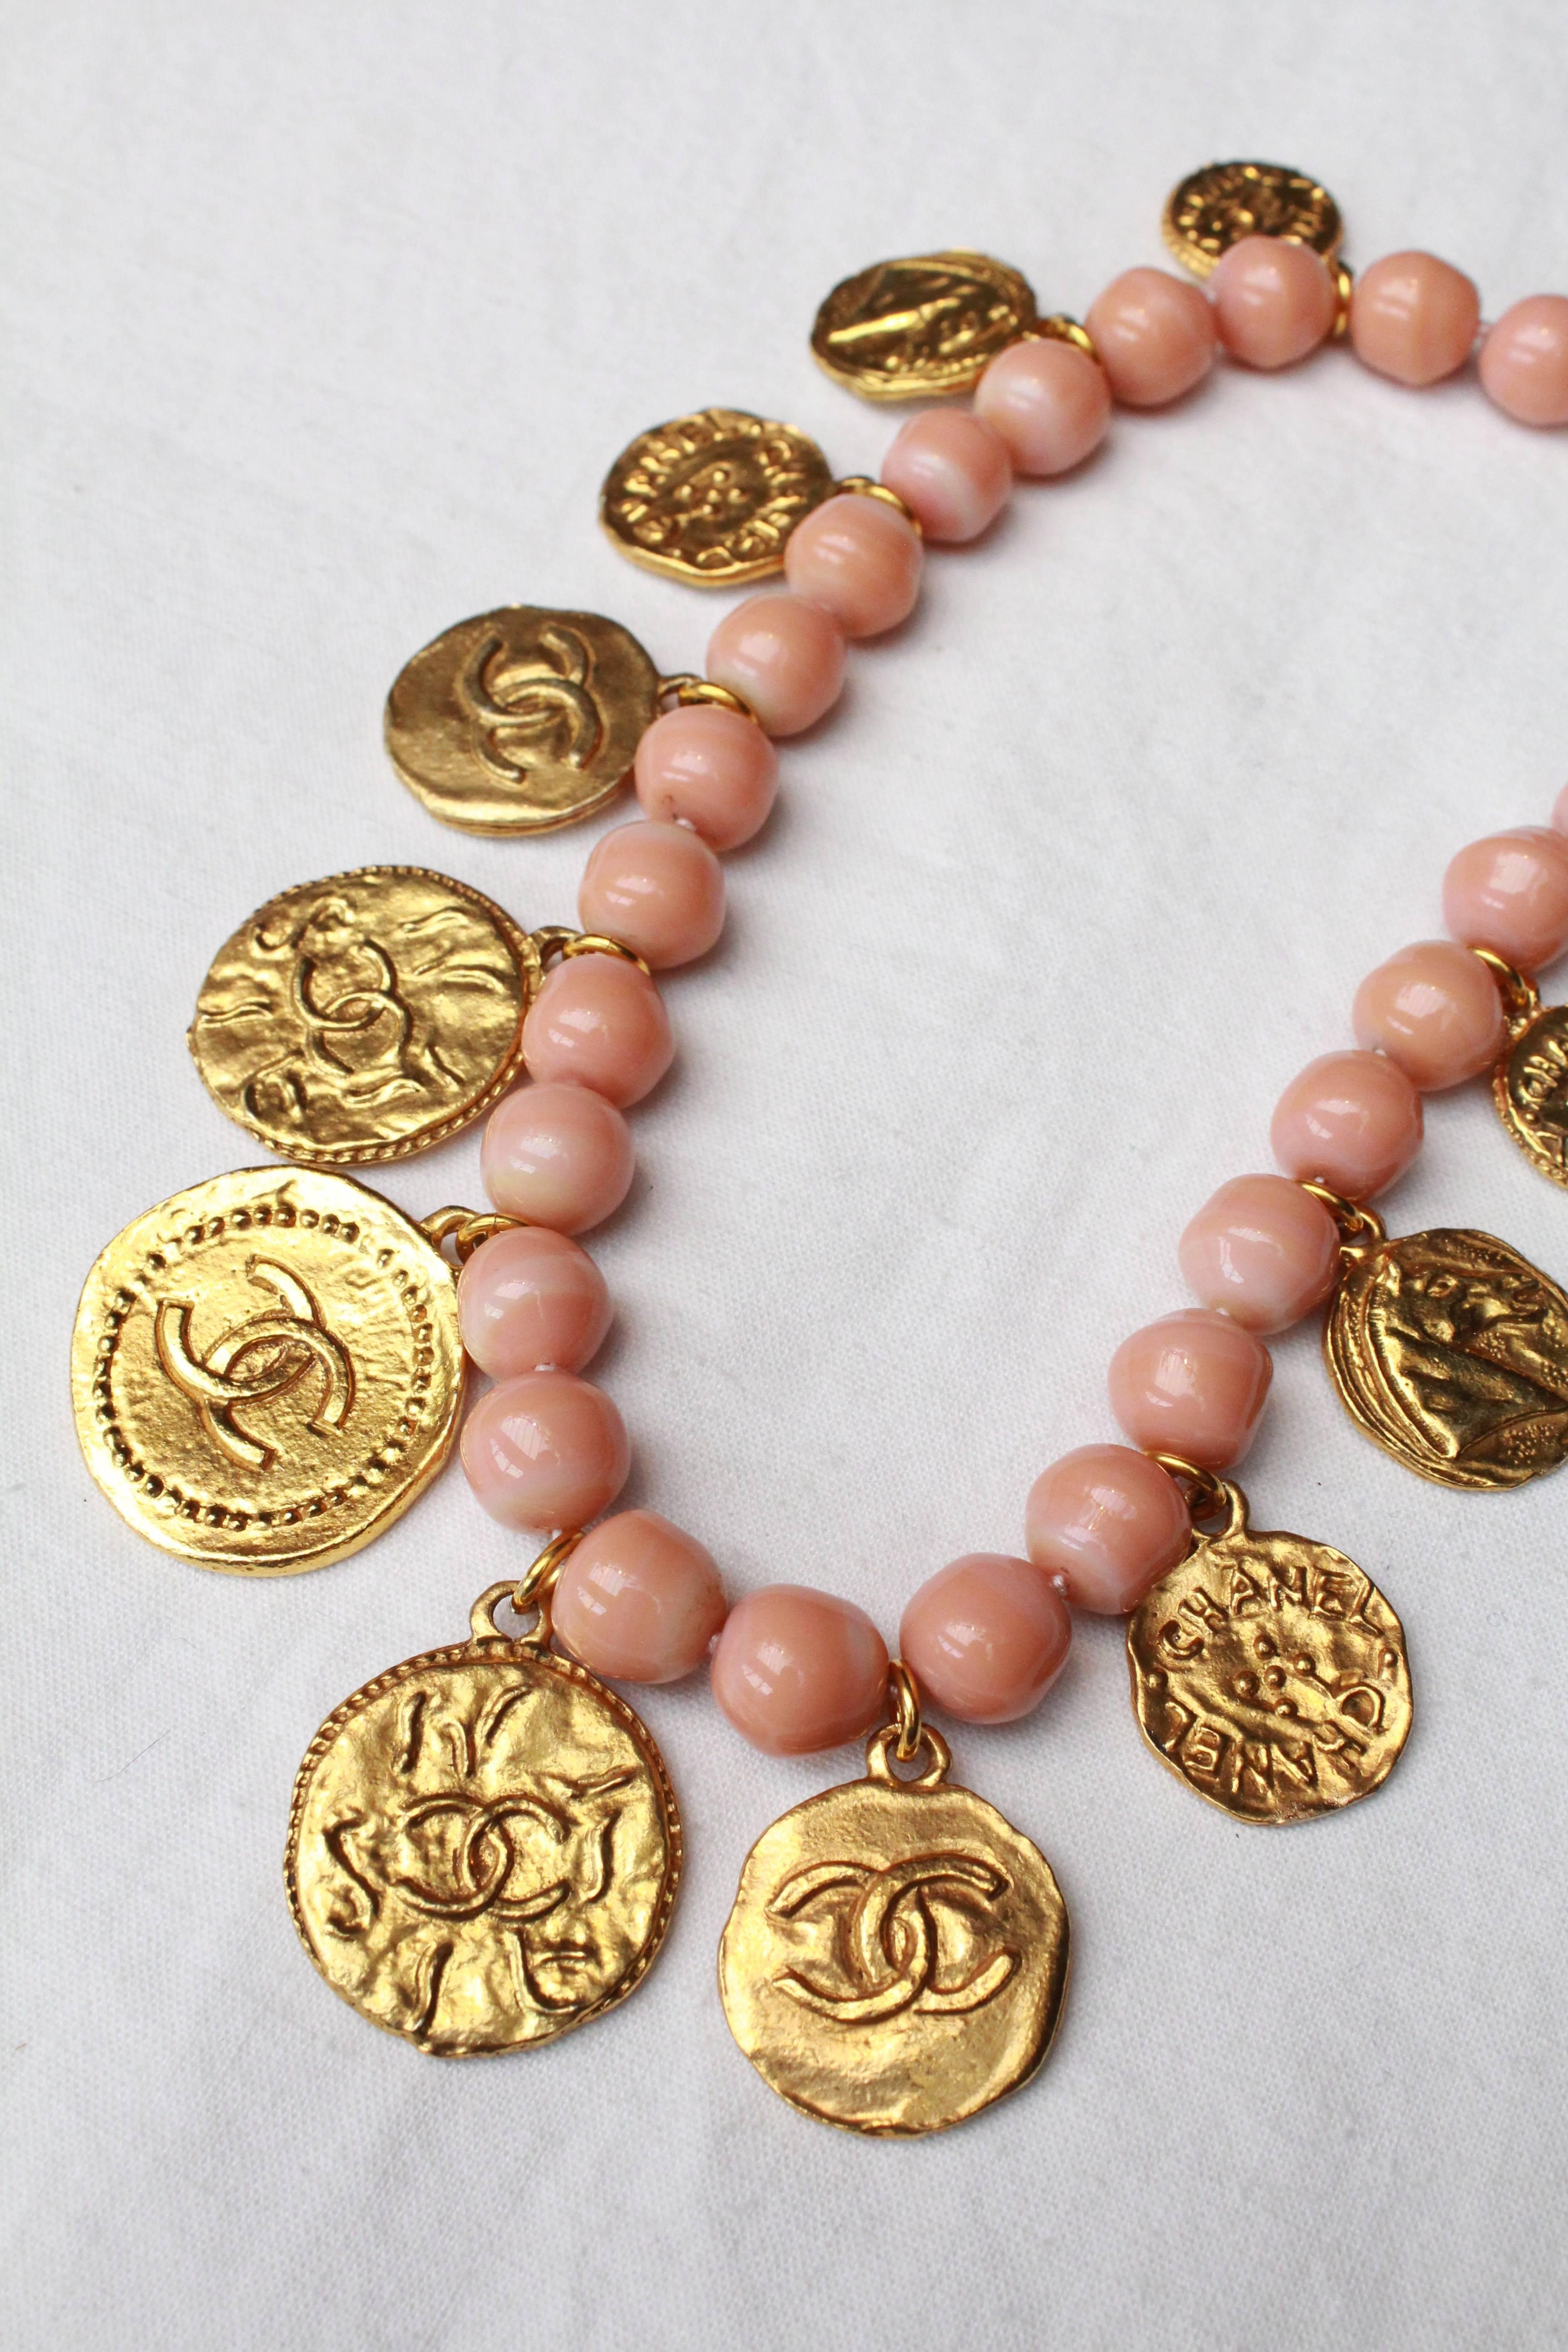 Women's Chanel Pink Beads Choker with Medallions, 1980s  